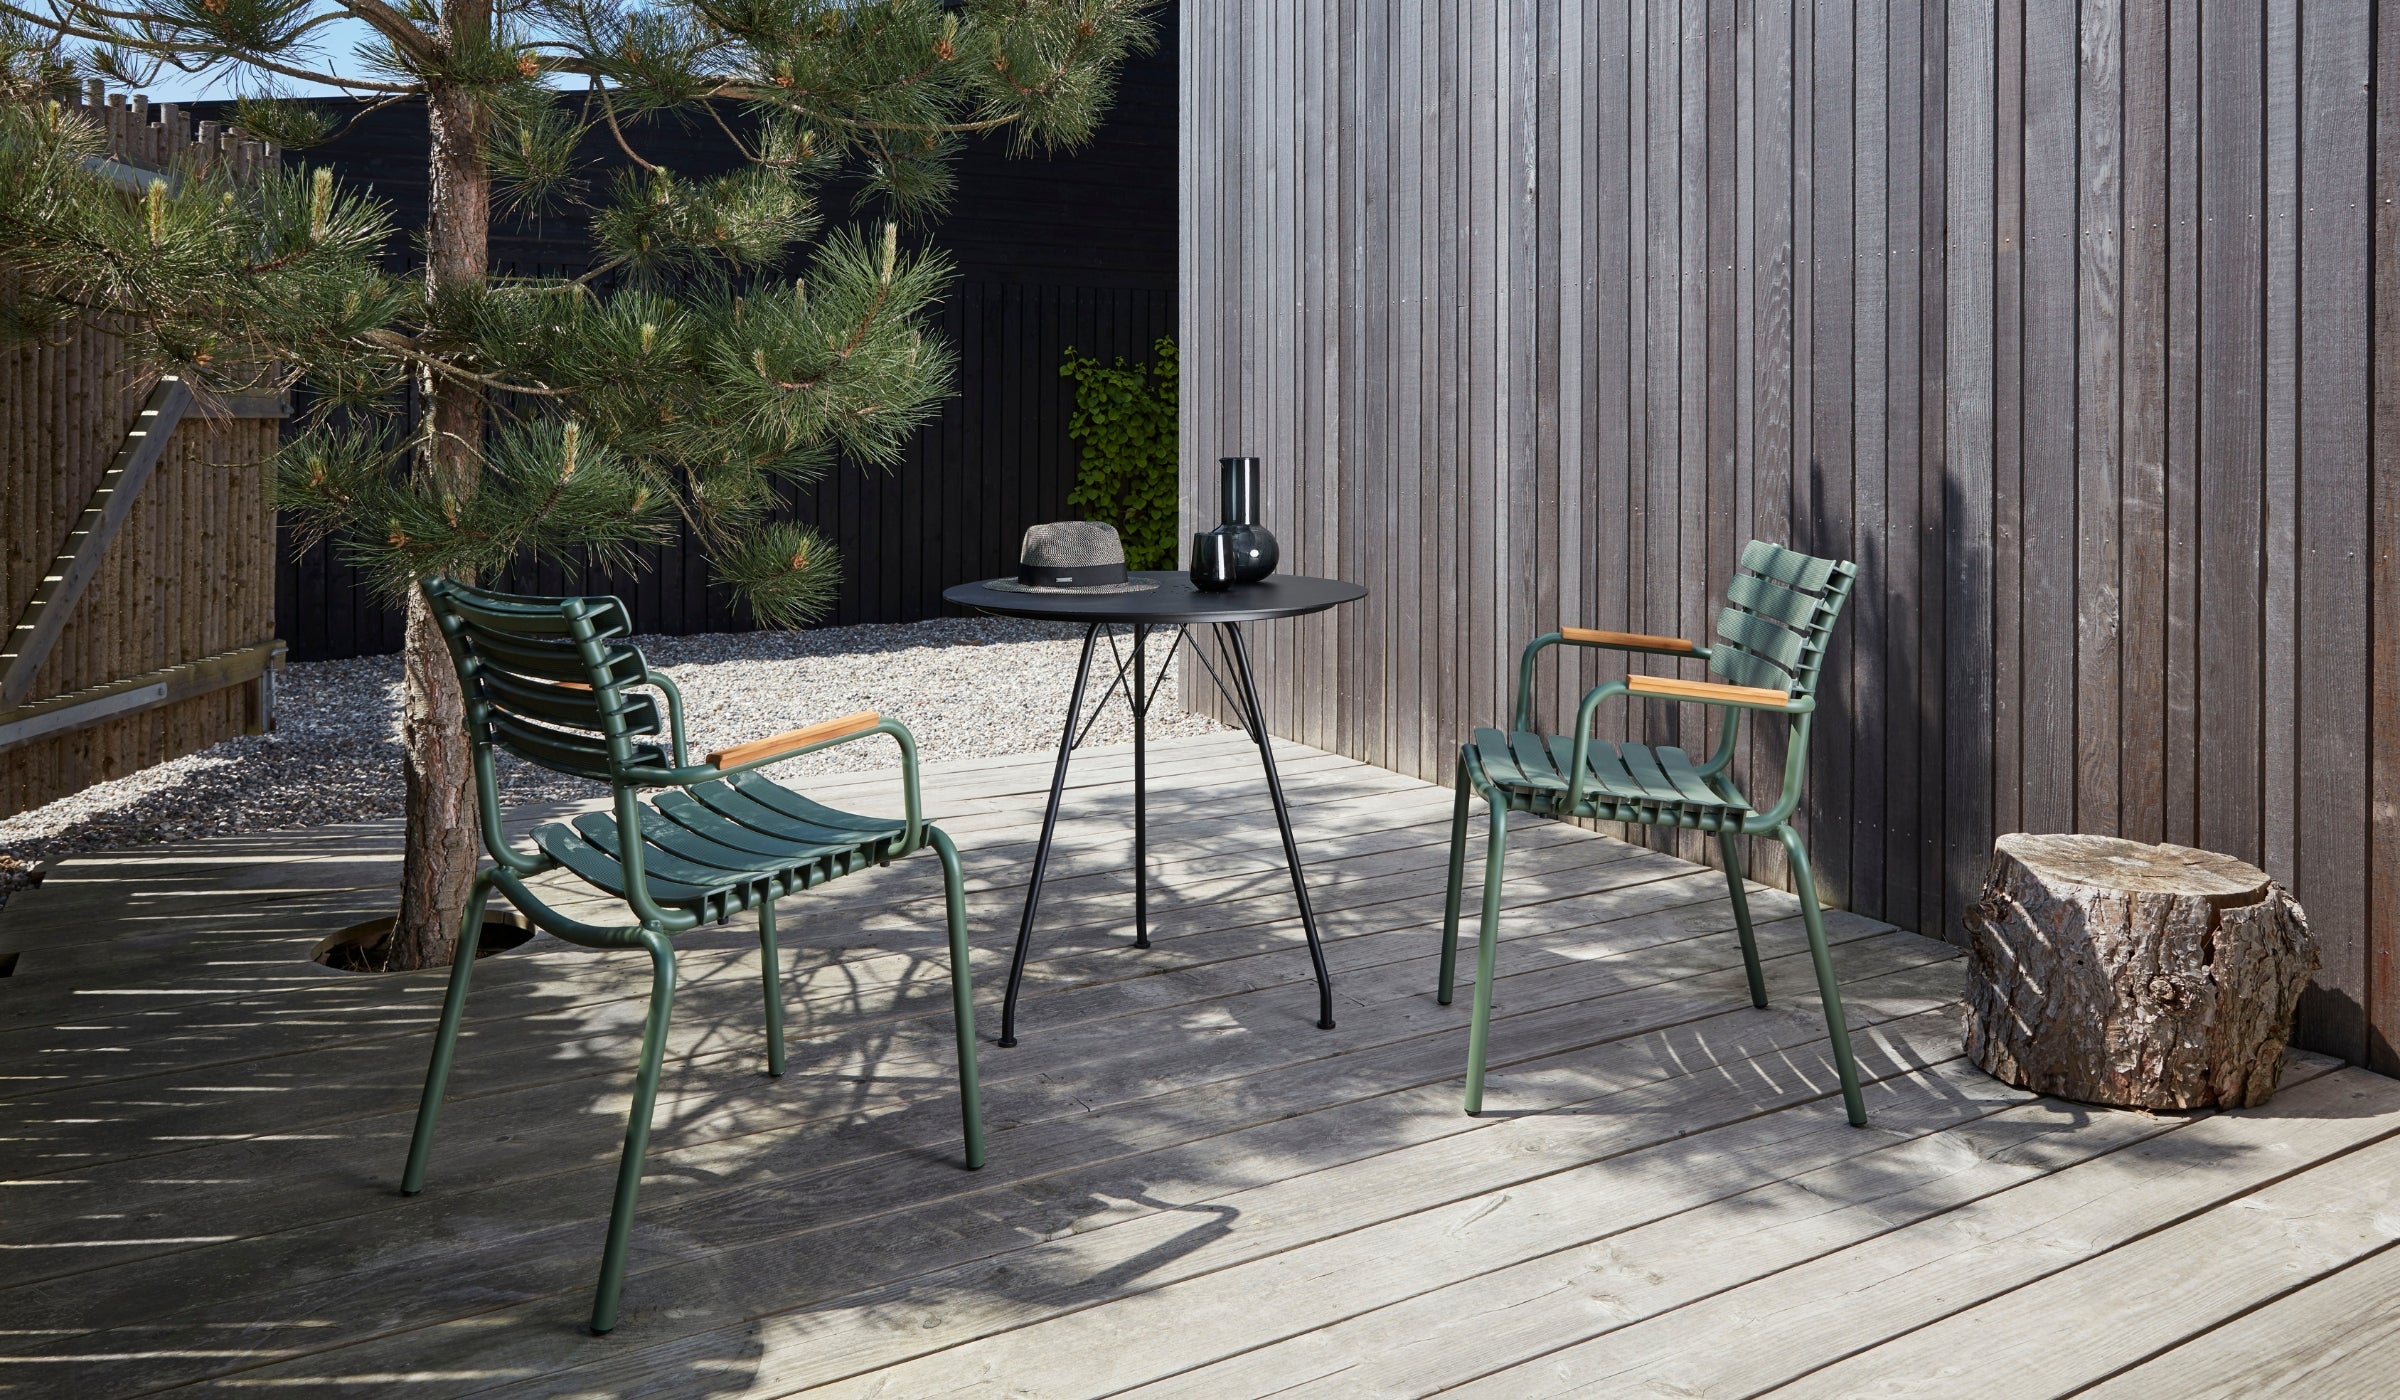 Reclips - Outdoor chair in aluminum and recycled plastic with bamboo armrests, olive green